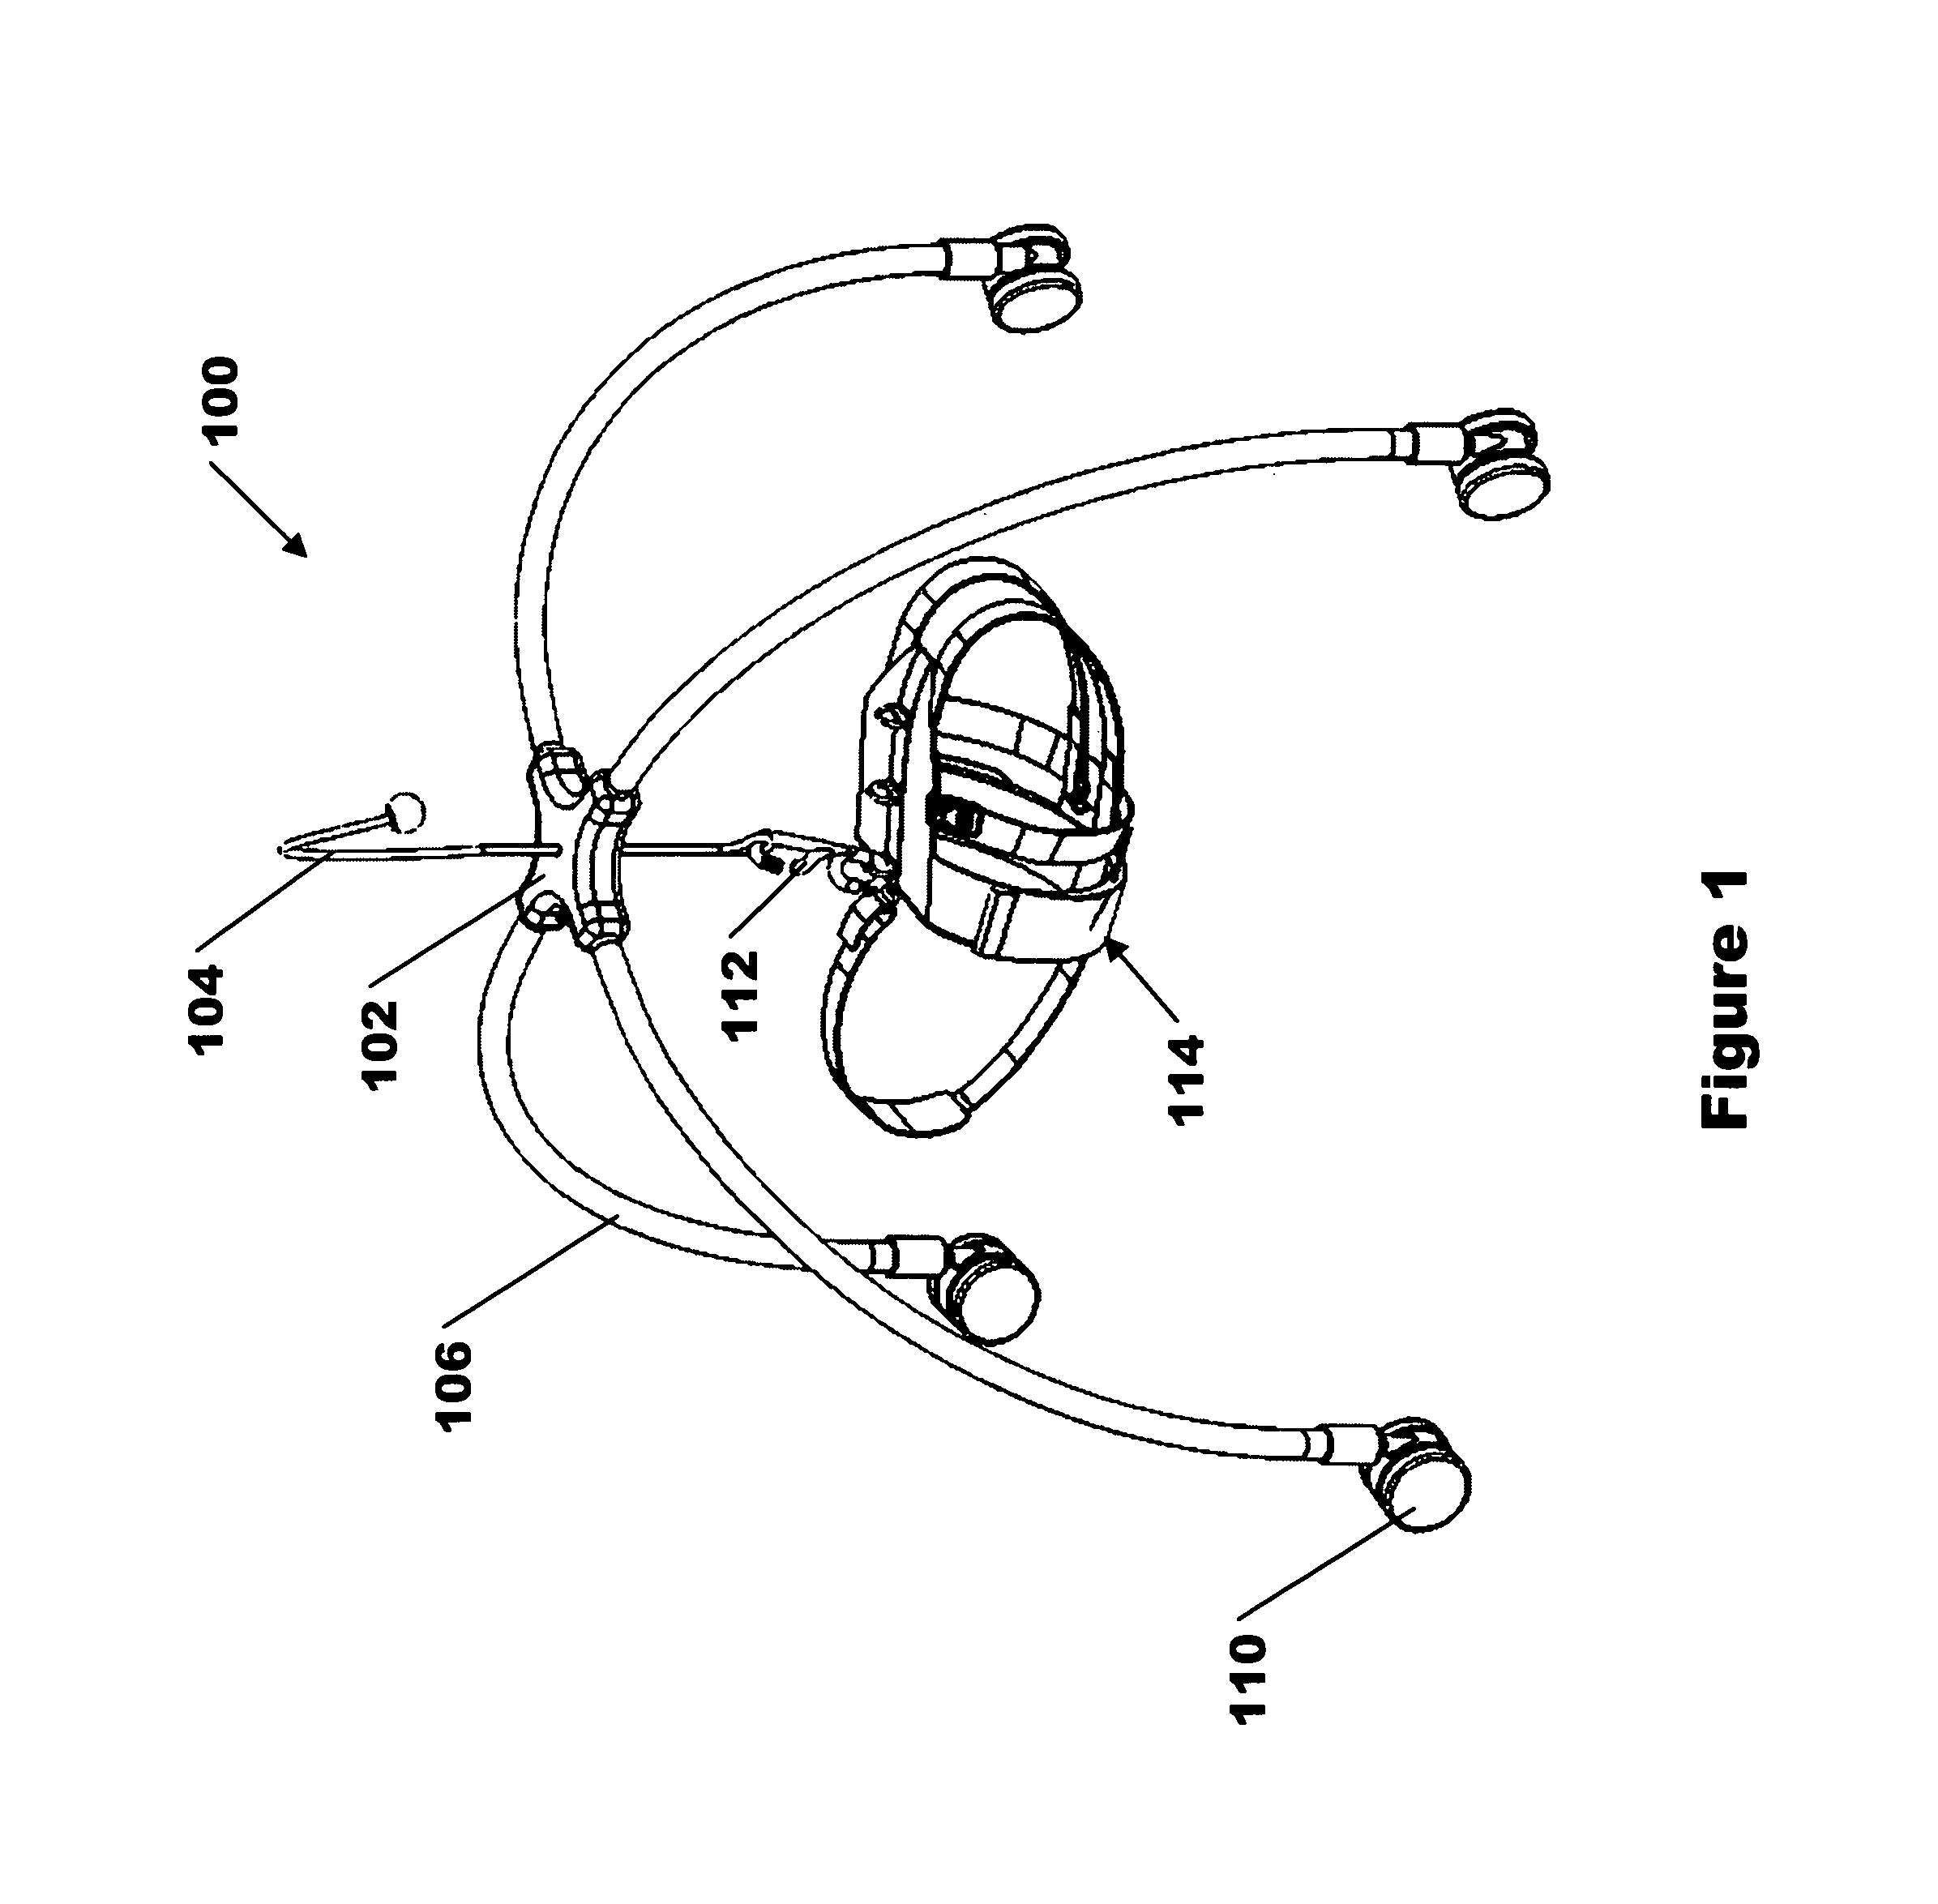 Infant mobility device